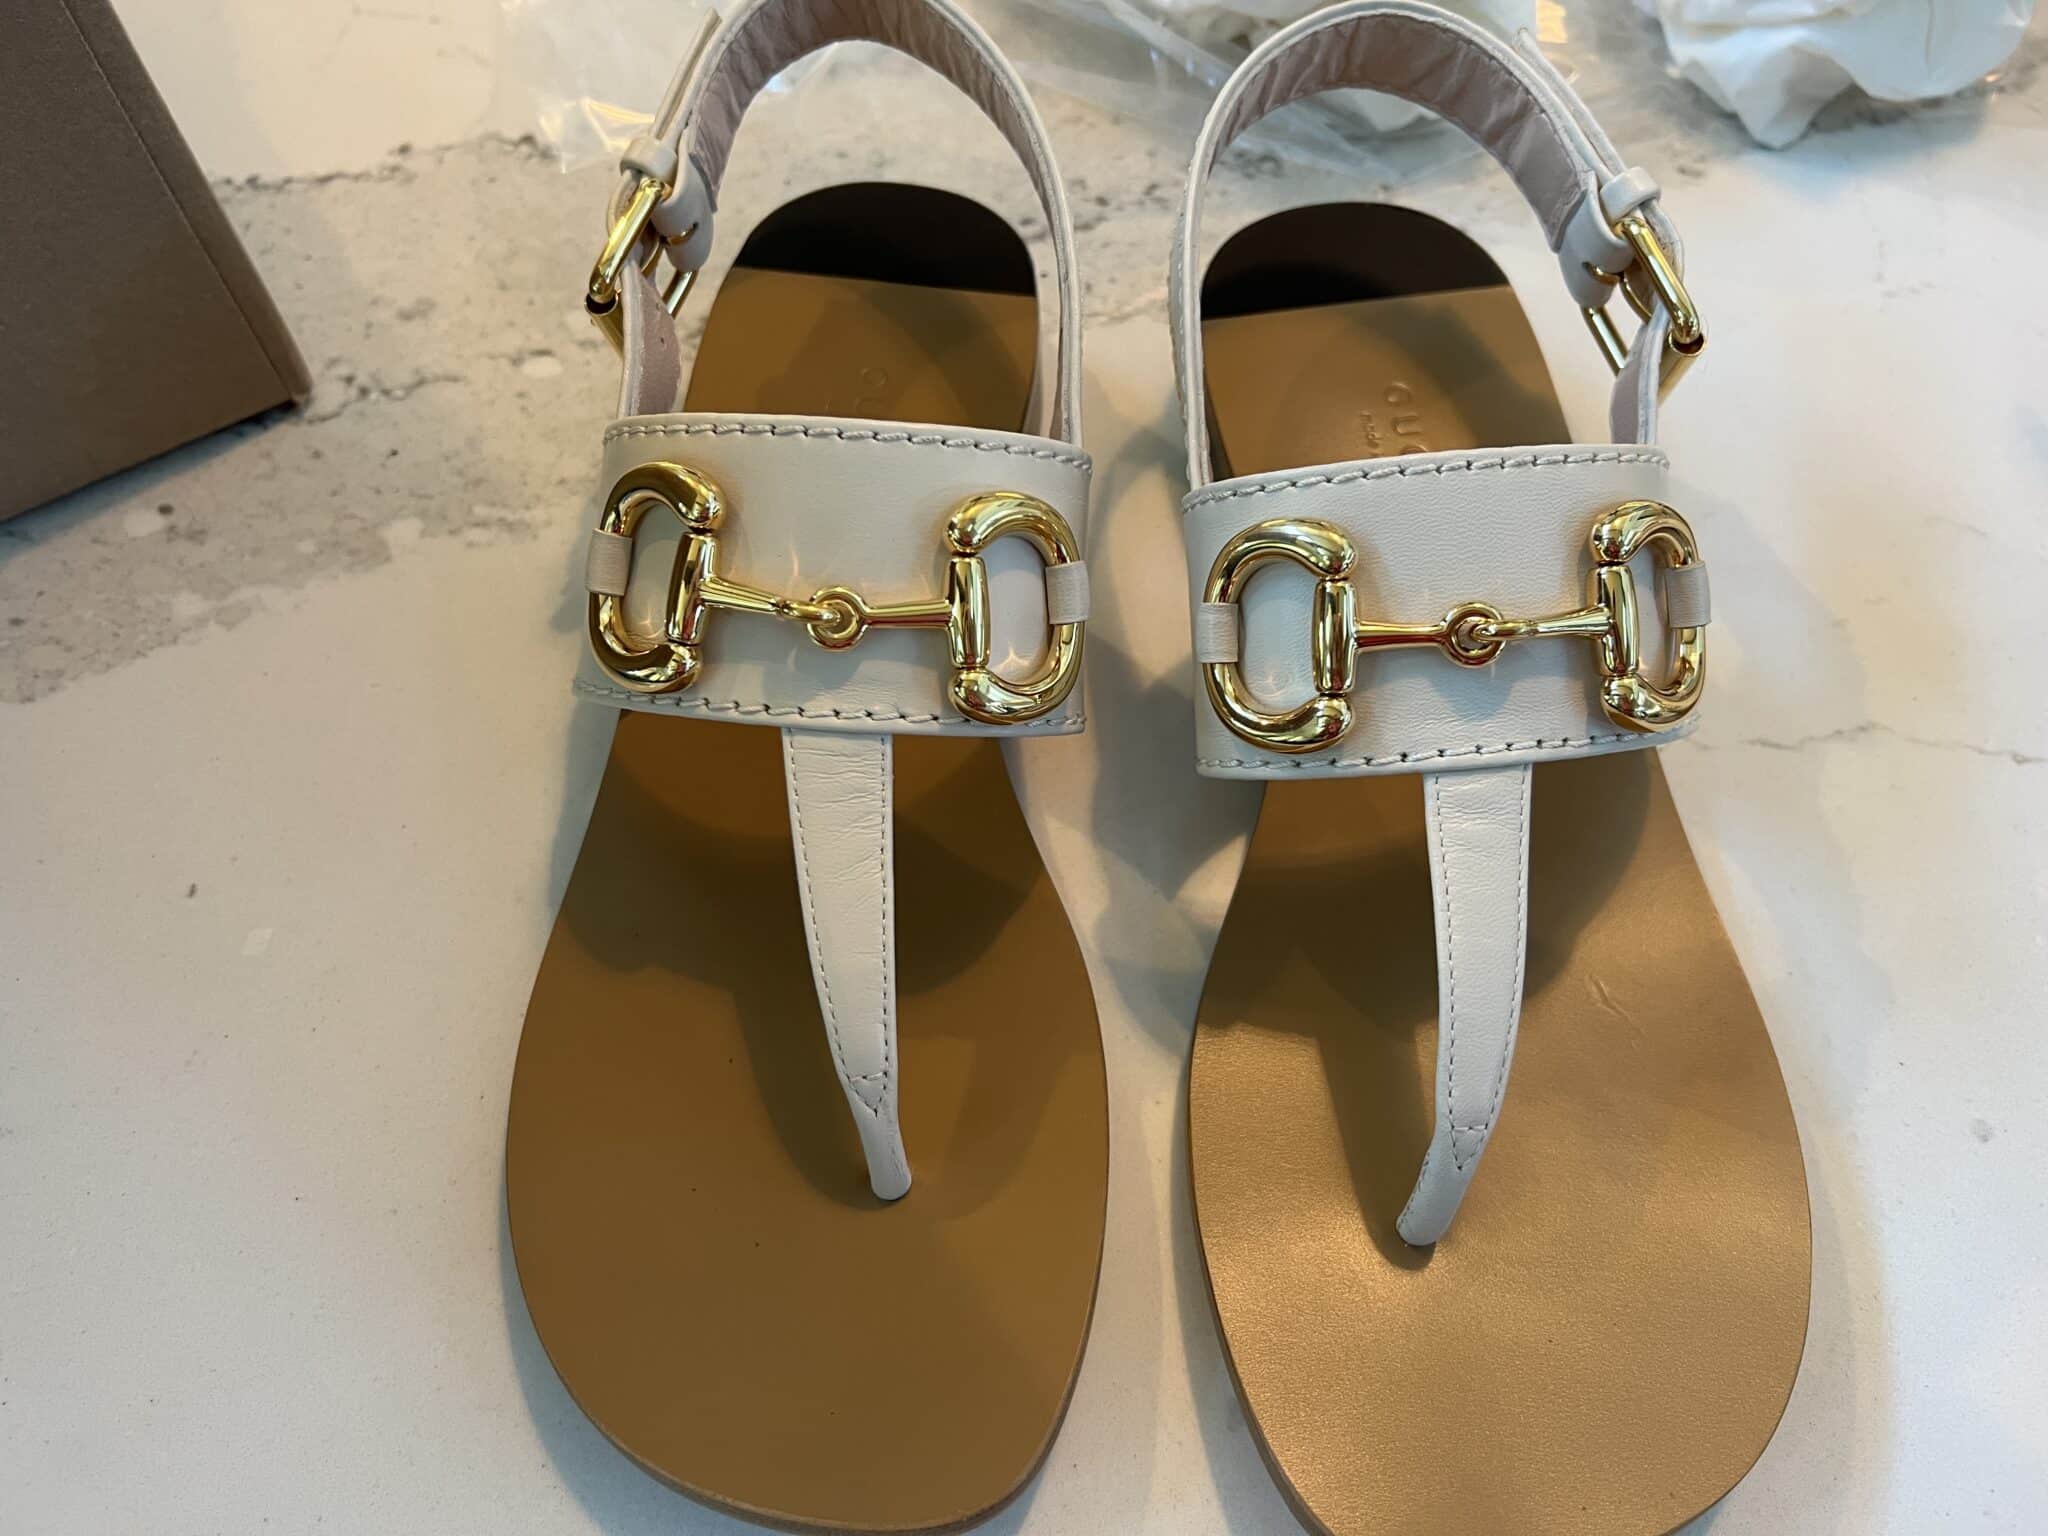 Honest Gucci Sandals Review For Sizing, Comfort, & Quality